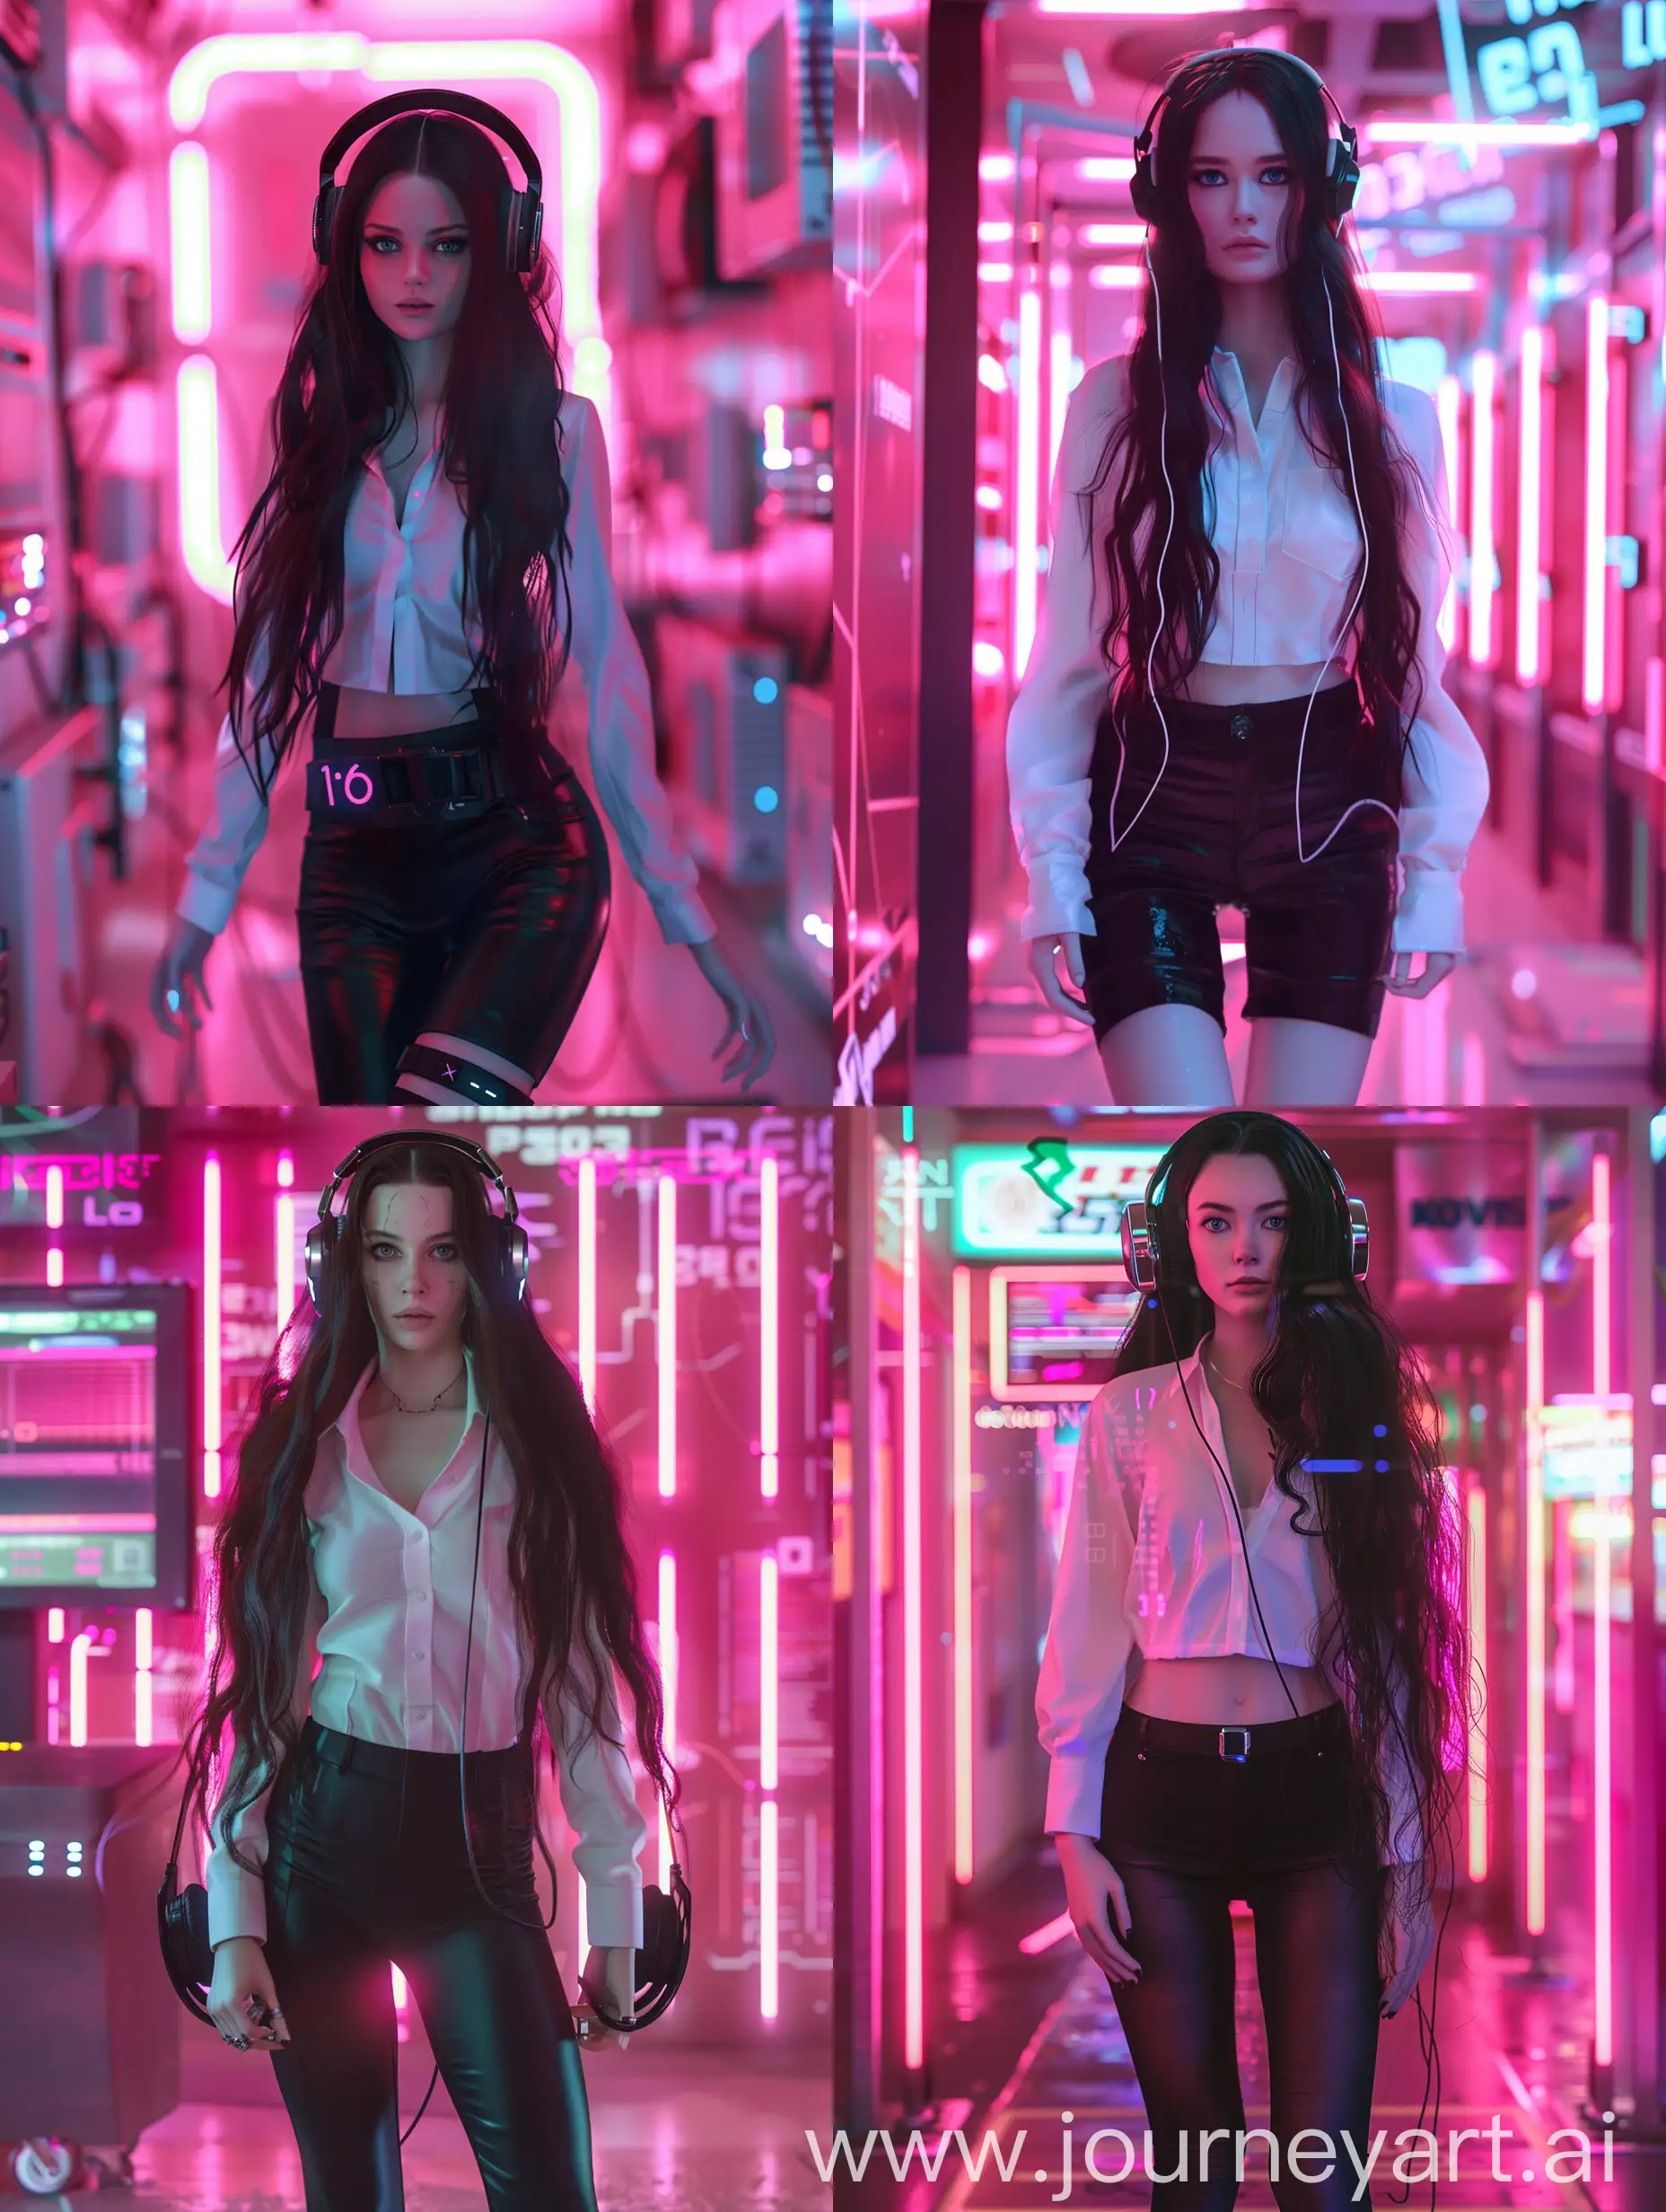 Kodak Vision 2383, full body photo of a mystic cyber droid biotech woman named Lisa Lou, with dark long hair and long model lags, wearing high-tech headphones and a white shirt and tight black pants, The background unfocused pinkish Neon Signs lights, with her "beautiful big blue eyes" she looks directly into the camera, detailed natural skin, retrofuturism, future tech, dramatic cinematic lighting, high detailed Natural skin, film grain, cyberpunk neon look, camera f1.6 lens,